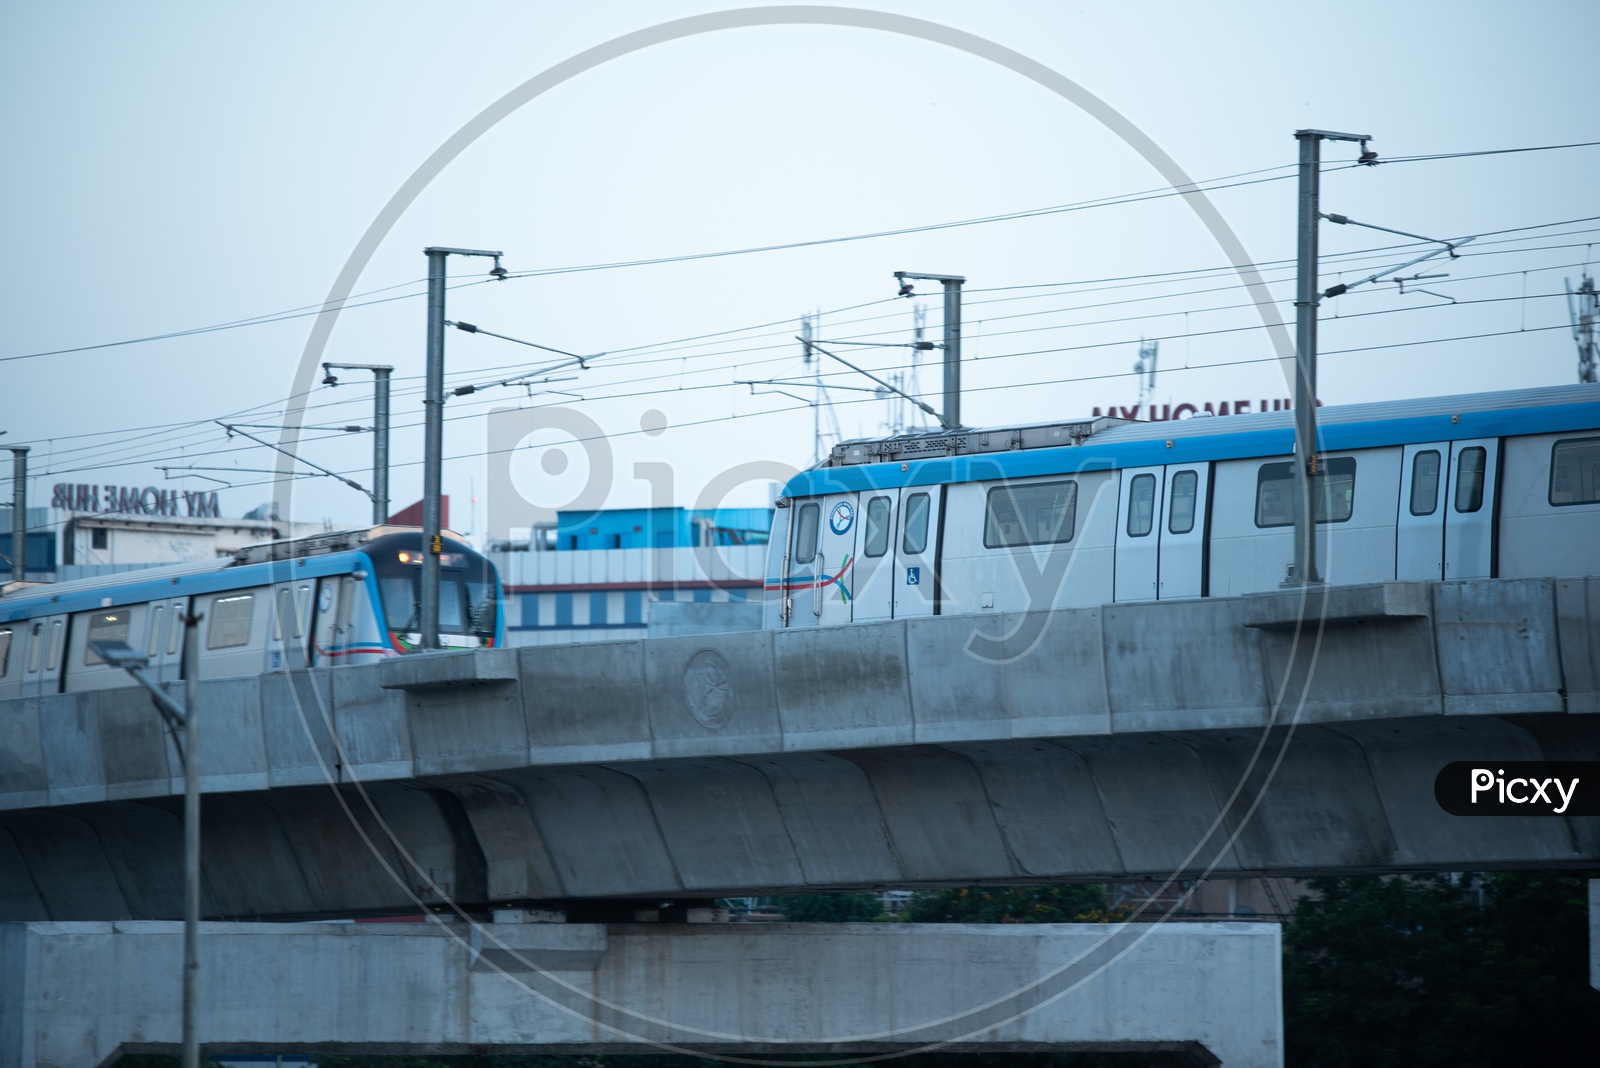 Hyderabad Metro trains Crossing Eachother on track